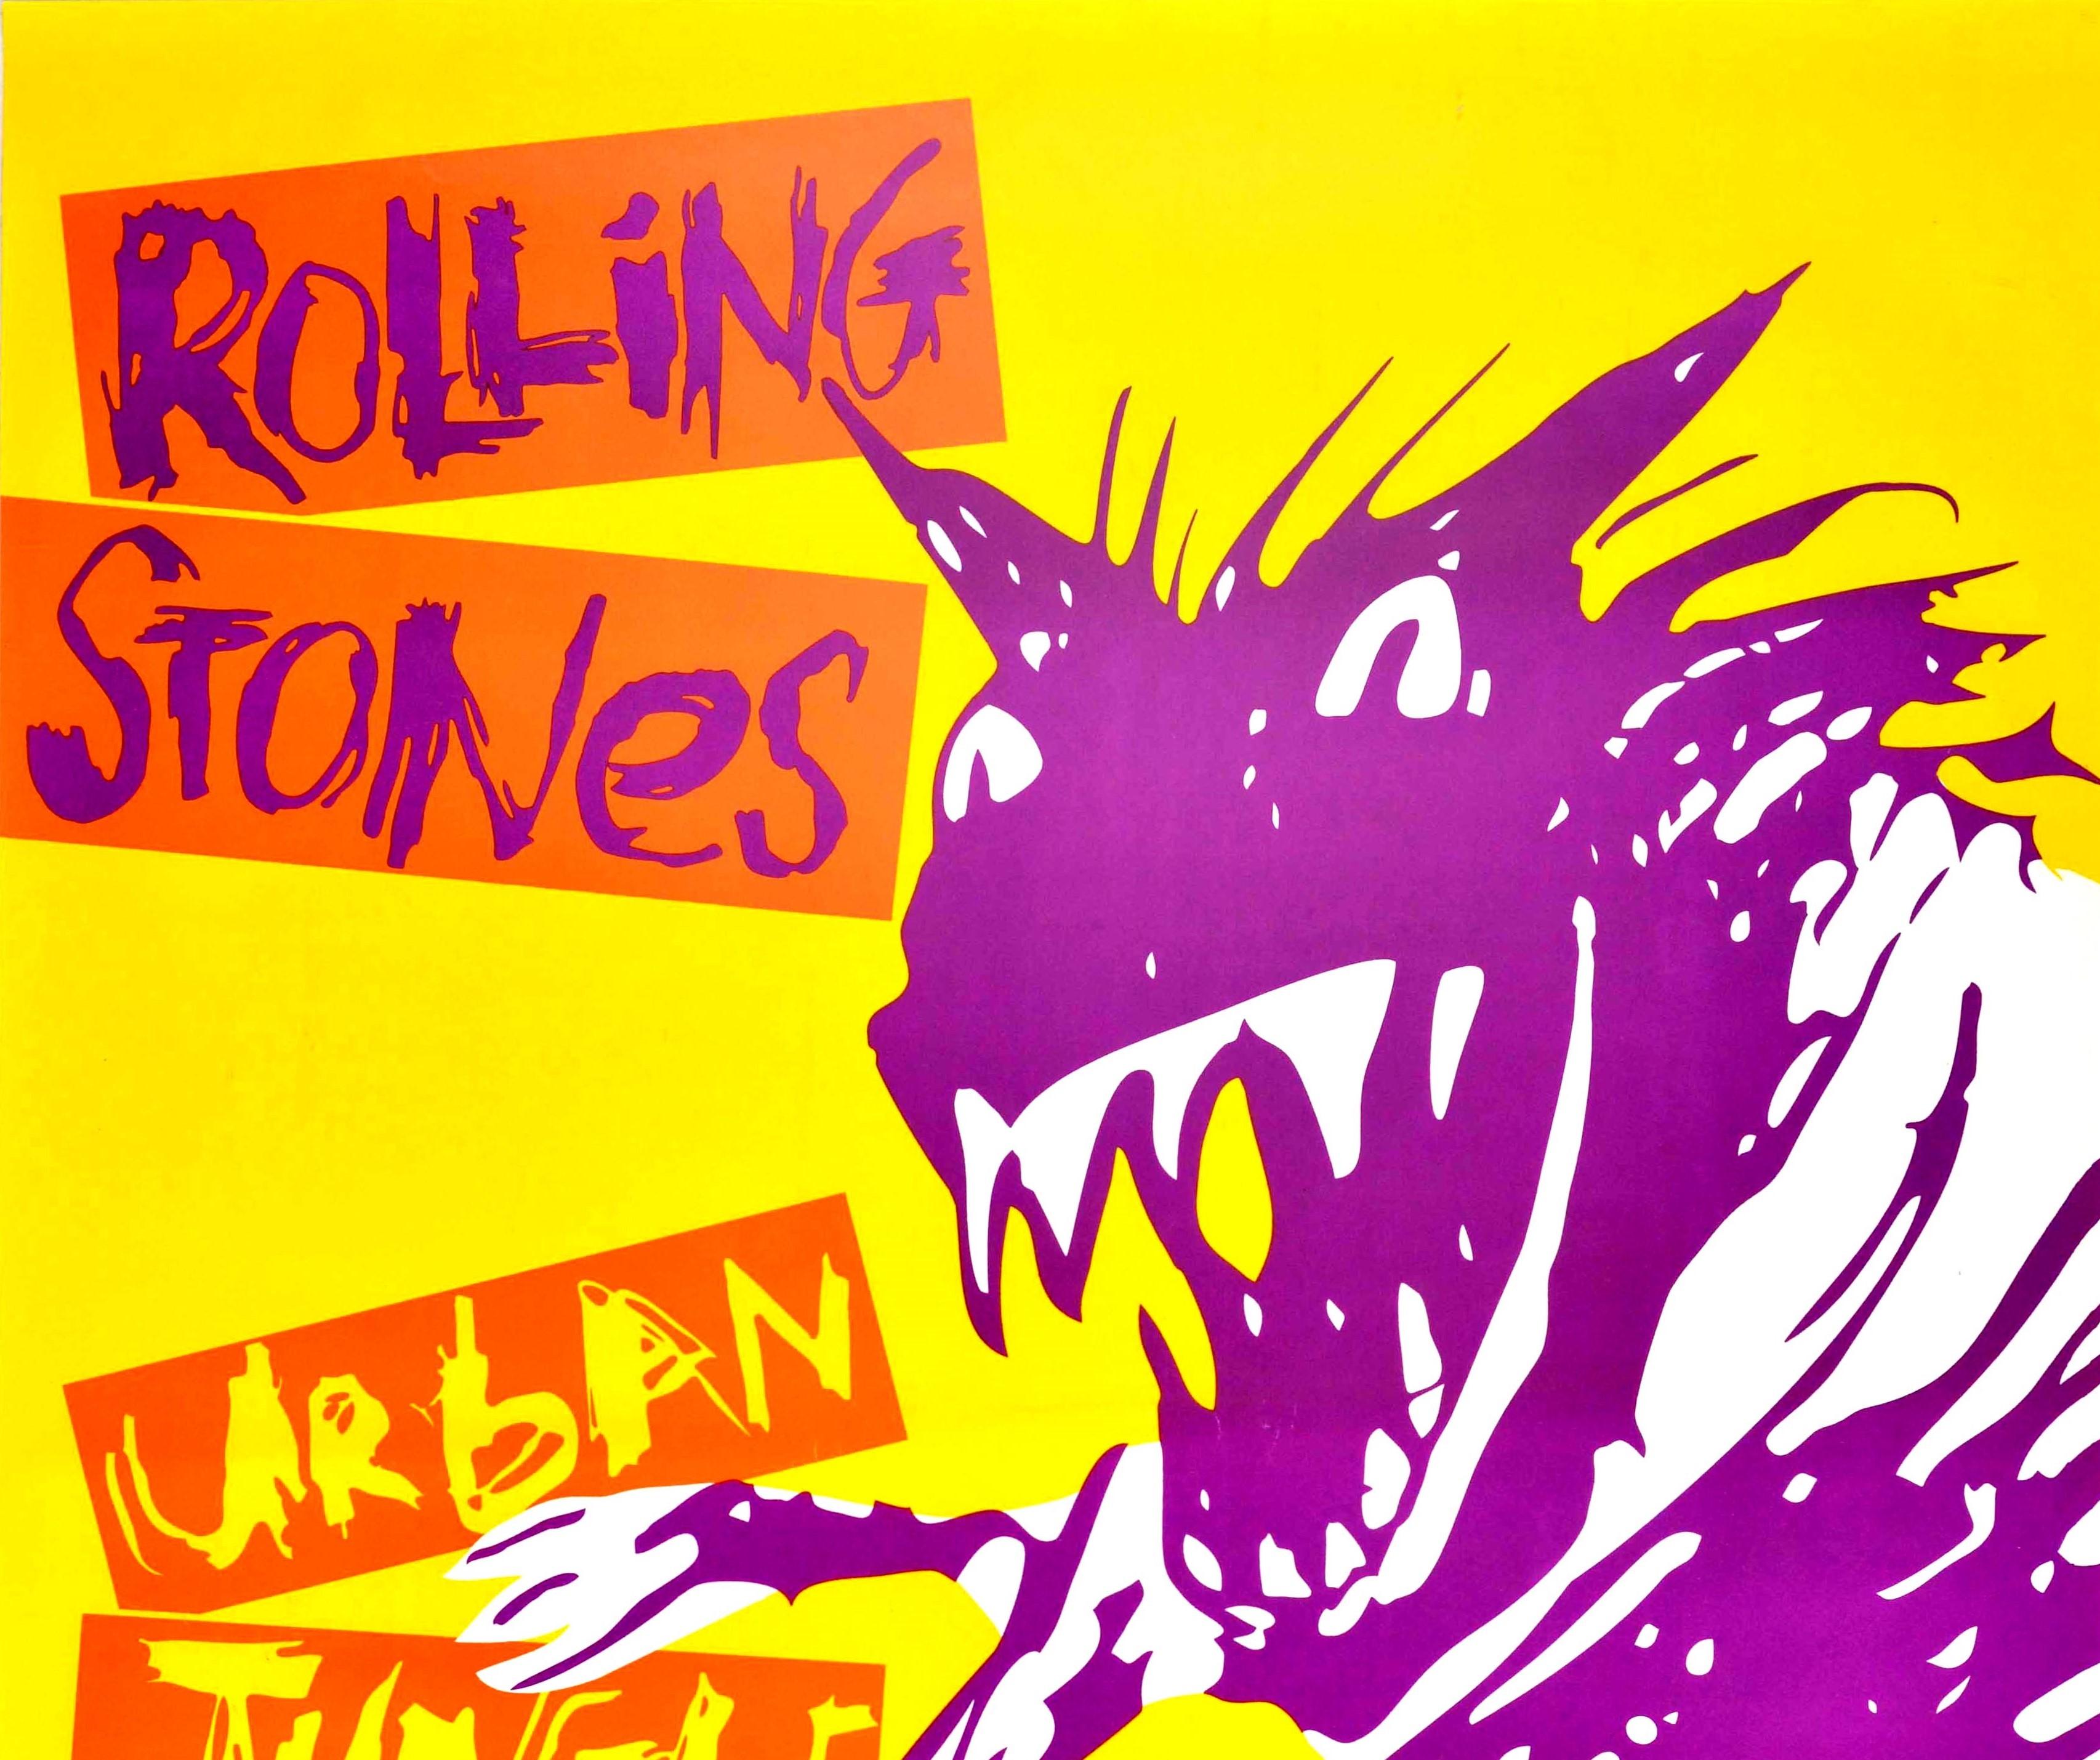 Original vintage music concert poster promoting the English rock band The Rolling Stones Urban Jungle tour to promote their Steel Wheels album released in 1989 featuring a graffiti style image by the British graphic designer Andie Airfix (1946-2018)